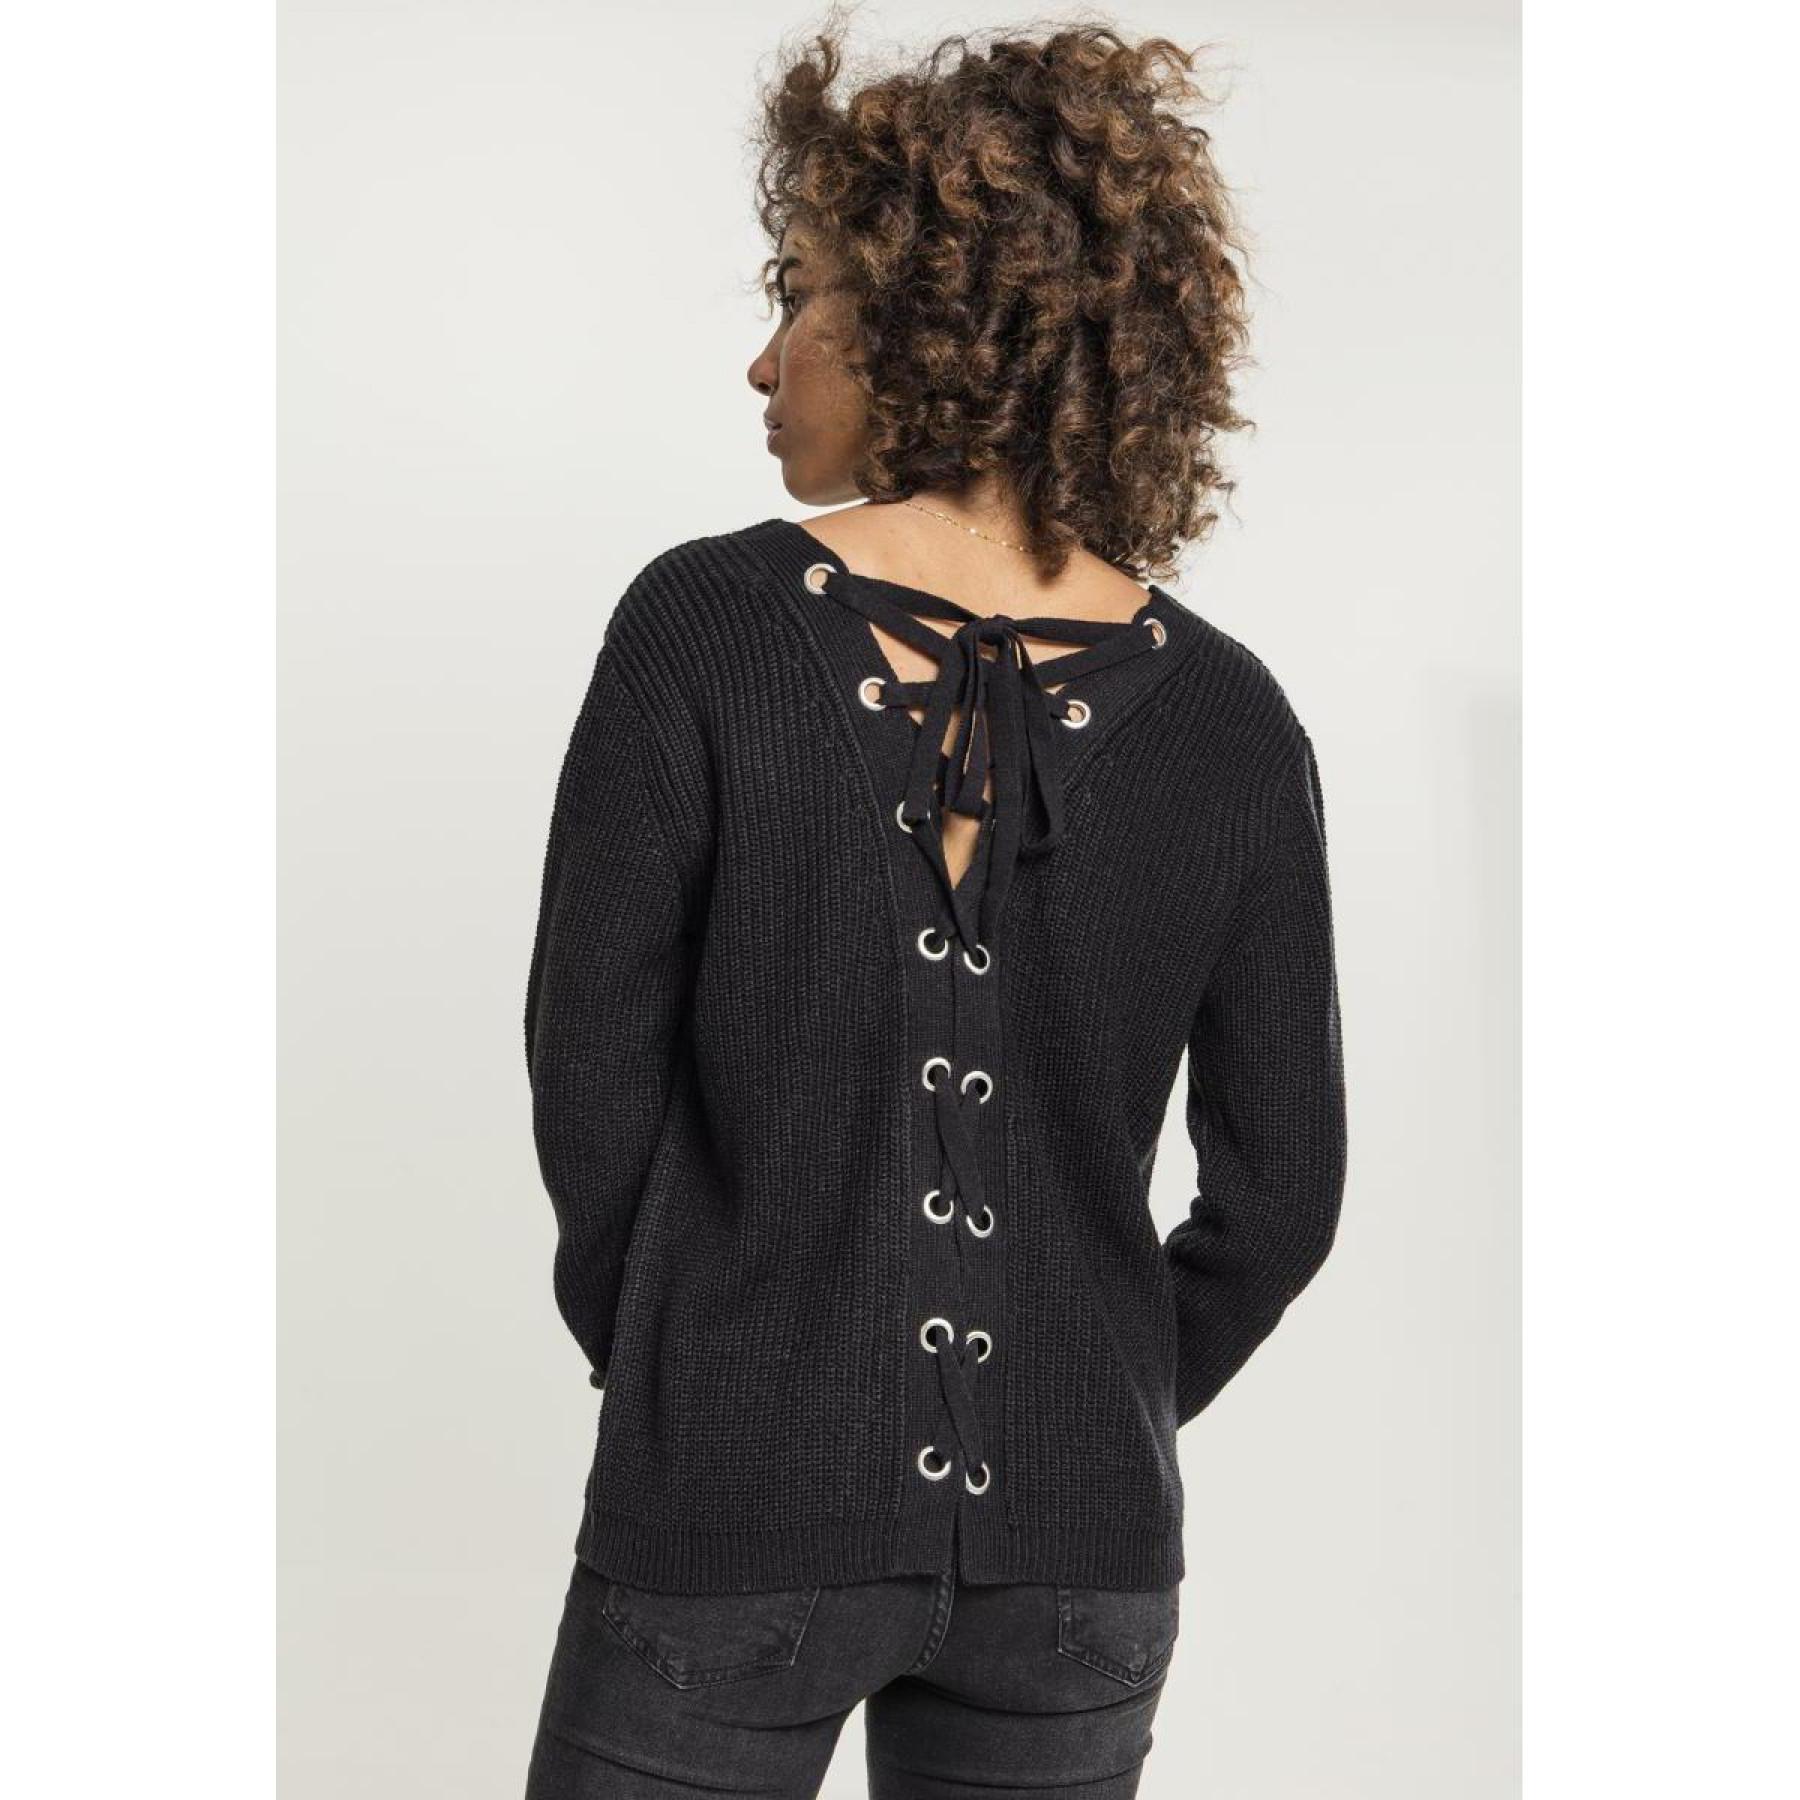 Sweatshirt femme grandes tailles Urban Classic back lace up